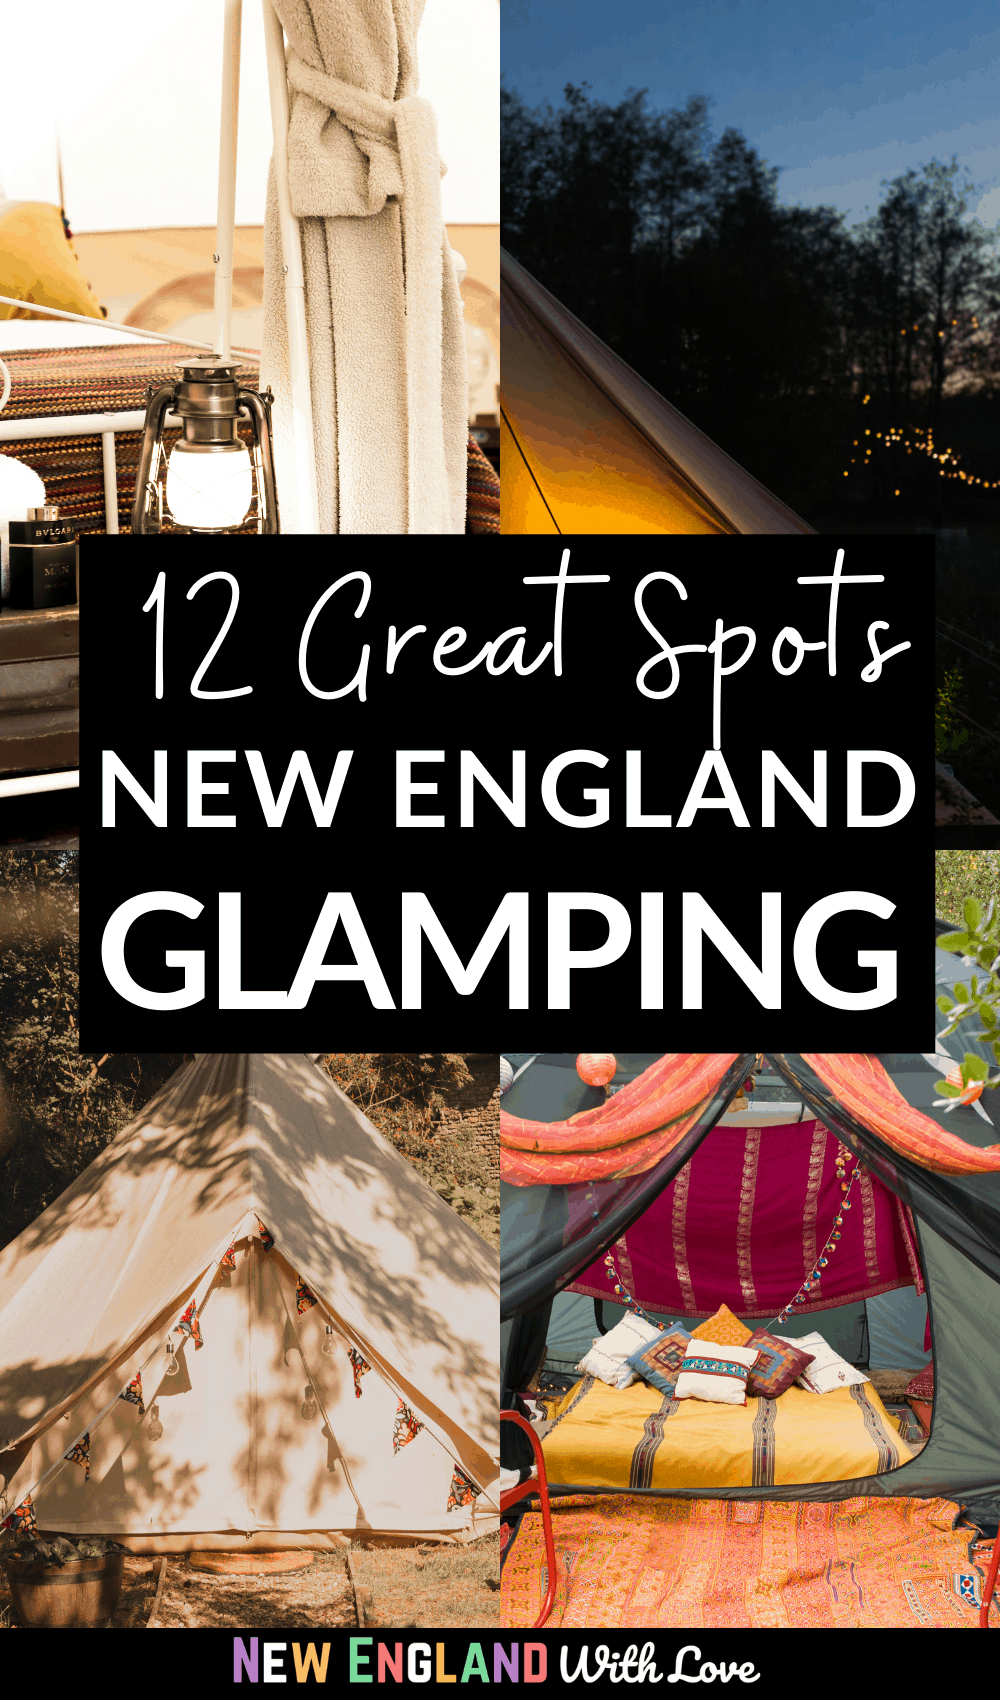 Pinterest graphic reading "12 Great Spots NEW ENGLAND GLAMPING"